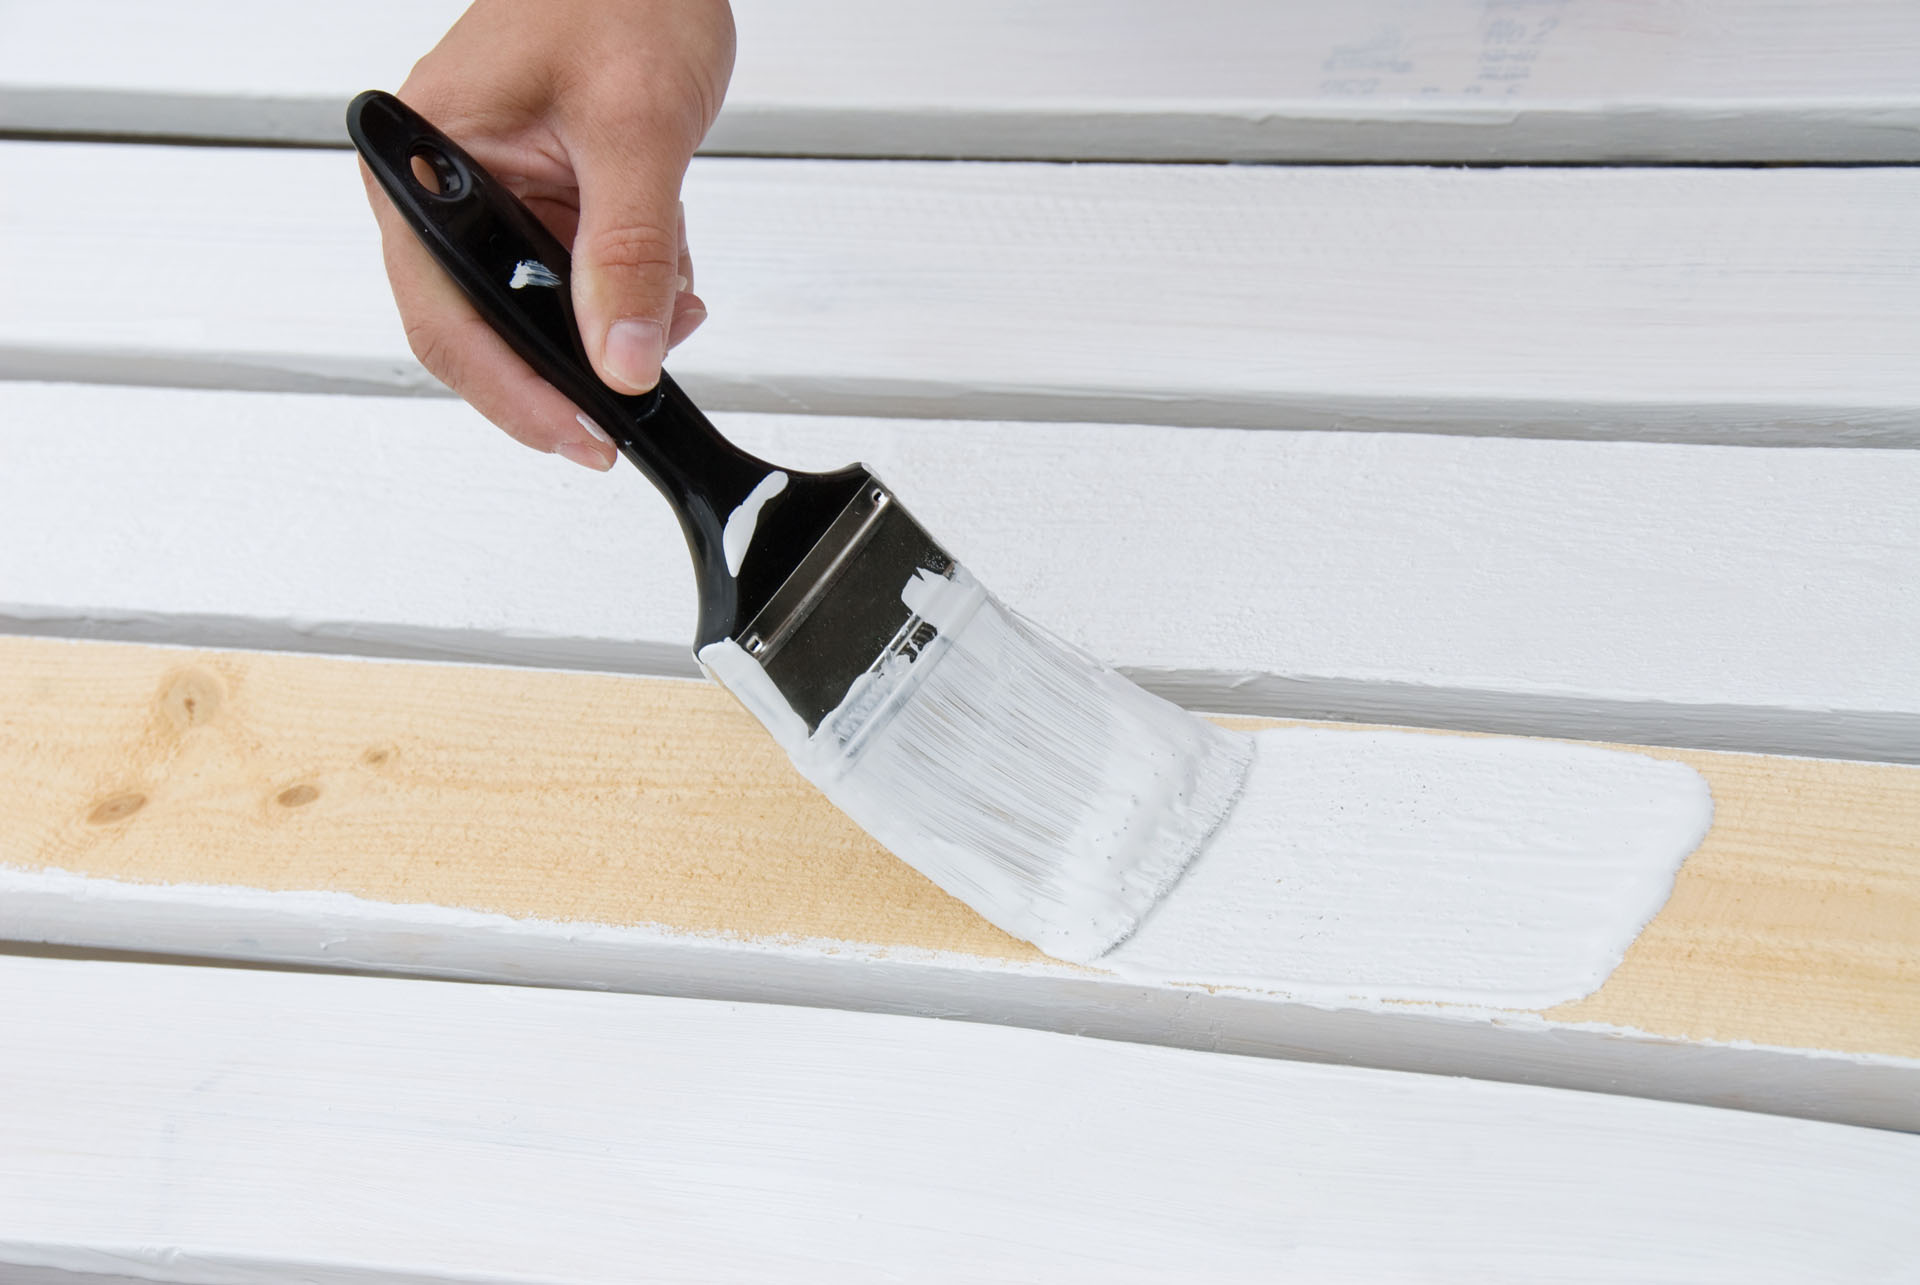 Hand painting wooden deck slats with white paint.